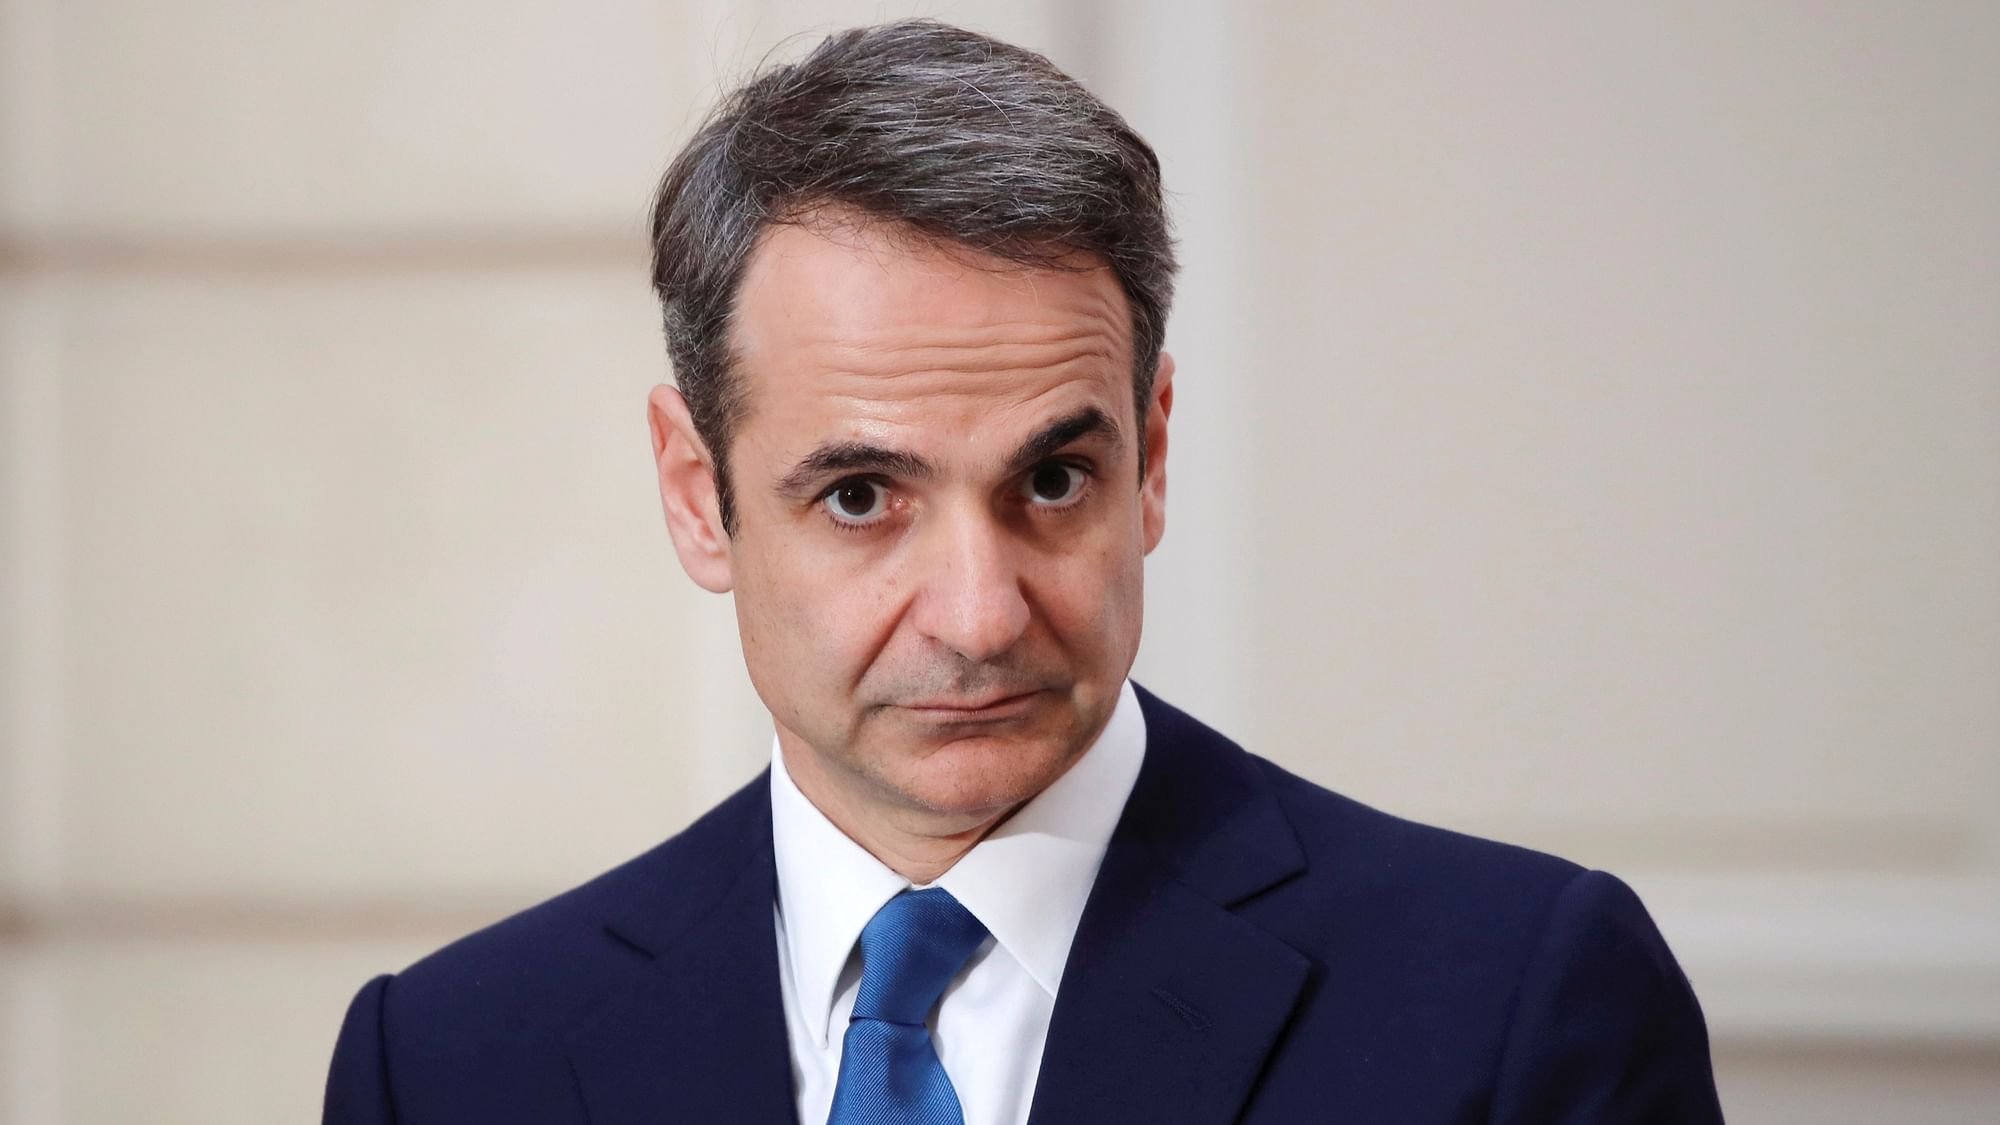 Prime Minister Kyriakos Mitsotakis said on Thursday, 30 January that he would extend “personal invitations” to the heads of FIFA and UEFA for emergency talks in Athens.